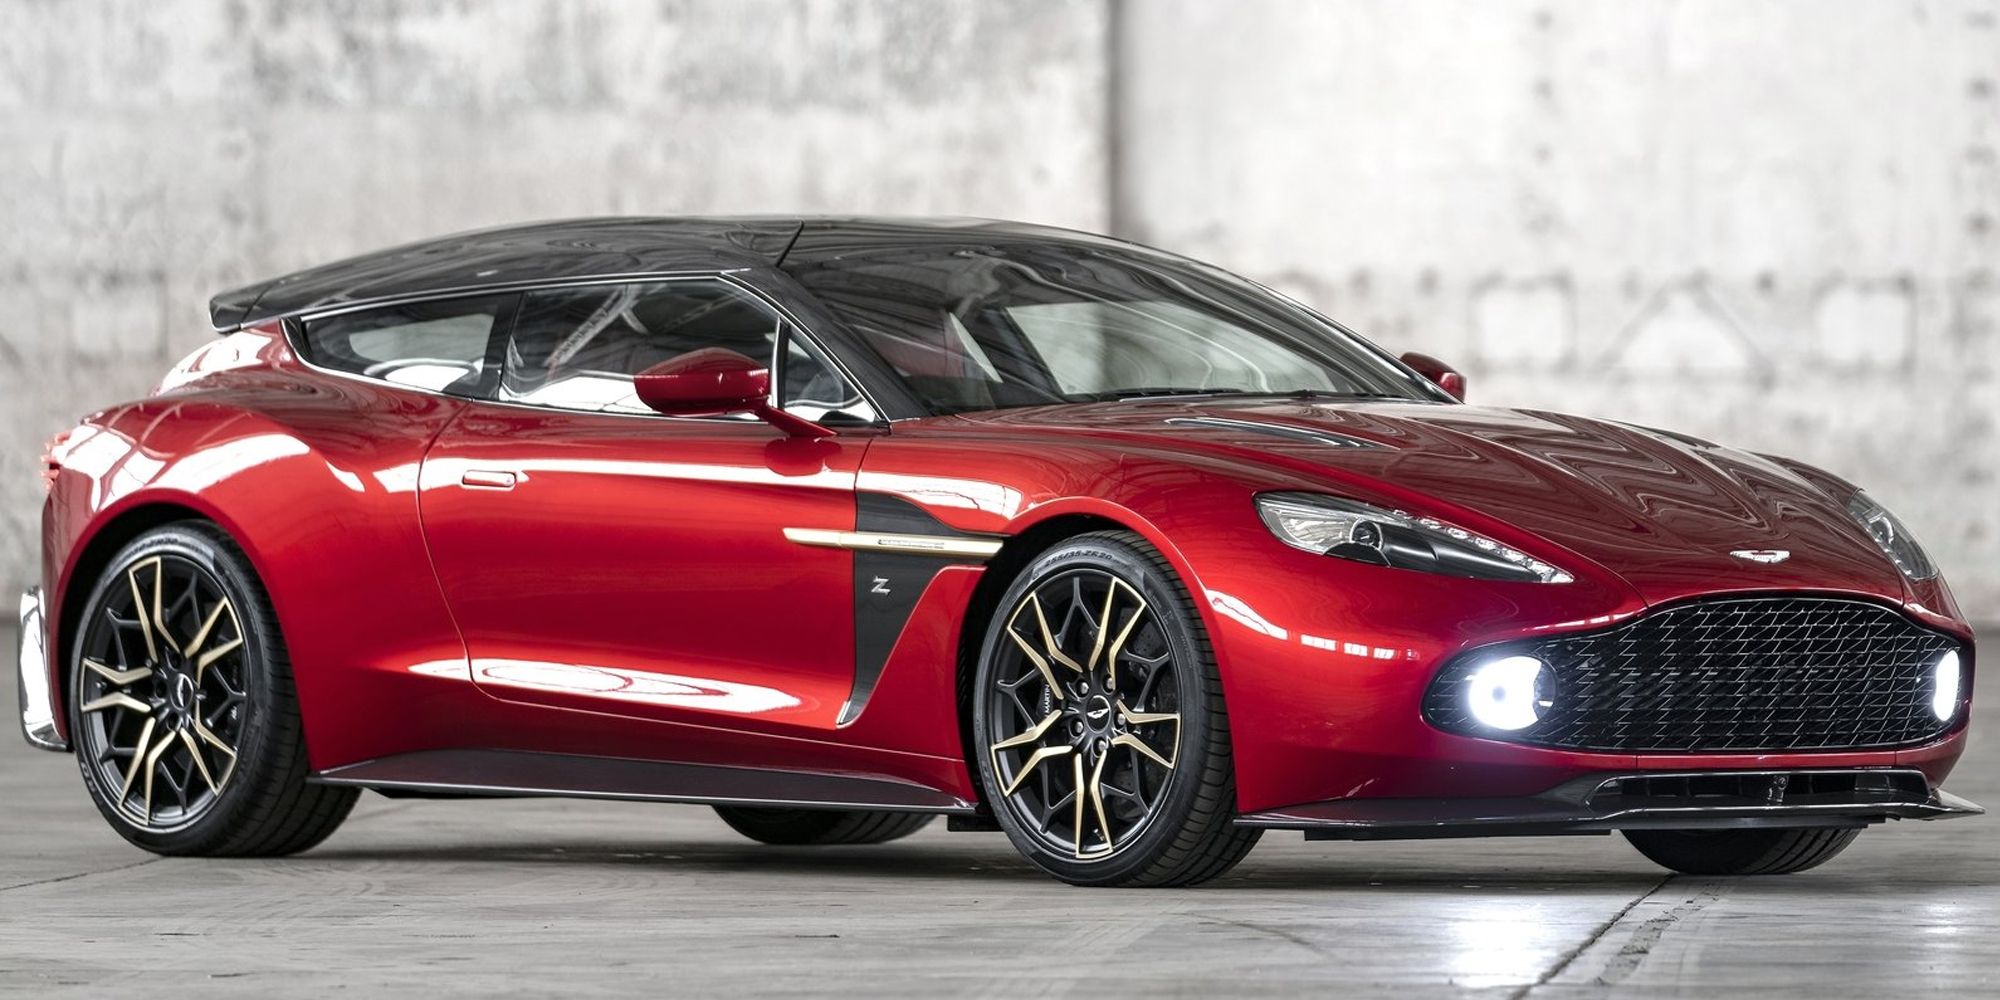 Front 3/4 view of the Vanquish Zagato Shooting Brake